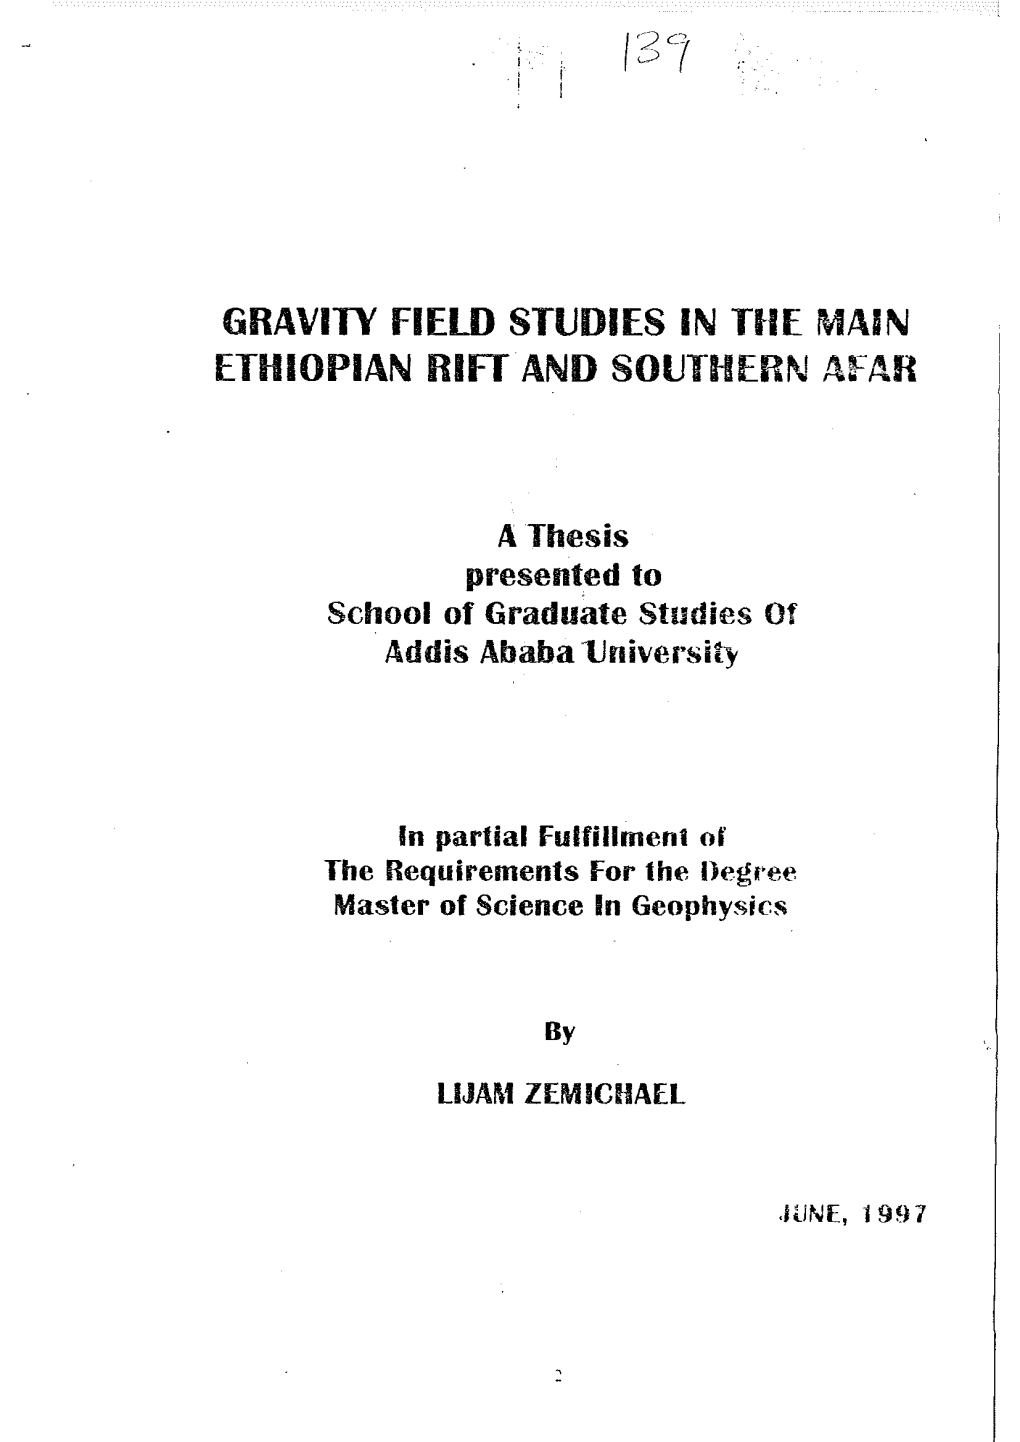 GRAVITY FIELD STUDIES in Fue Main ETHIOPIAN RIFT and SOUTH[R~J Afar